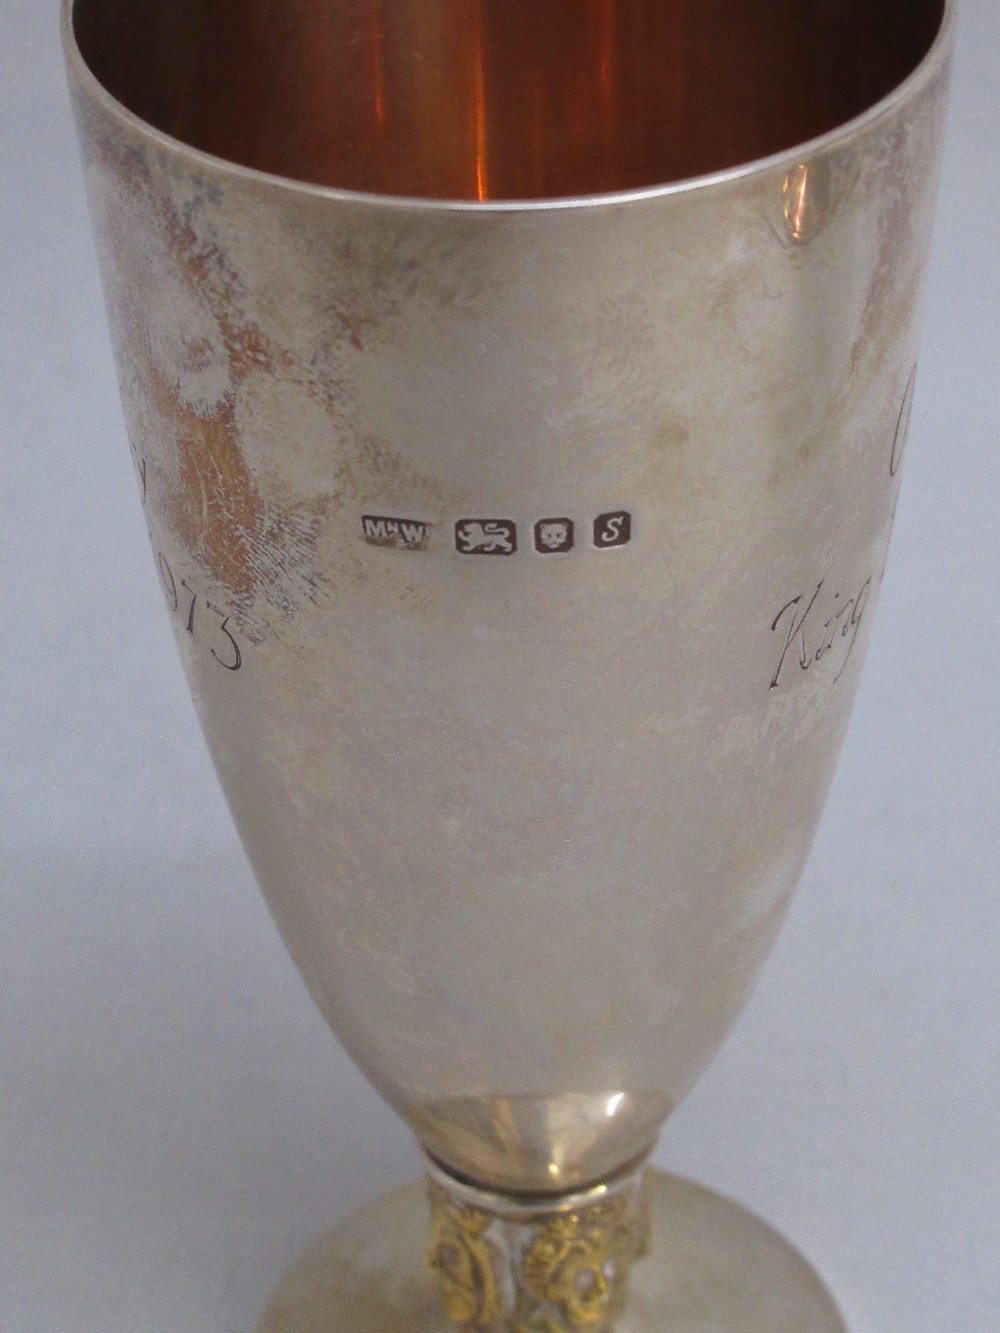 TWO LIMITED EDITION COMMEMMORATIVE SILVER GOBLETS "1952-1977 THE QUEEN'S SILVER JUBILEE" BY COURTMAN - Image 7 of 7